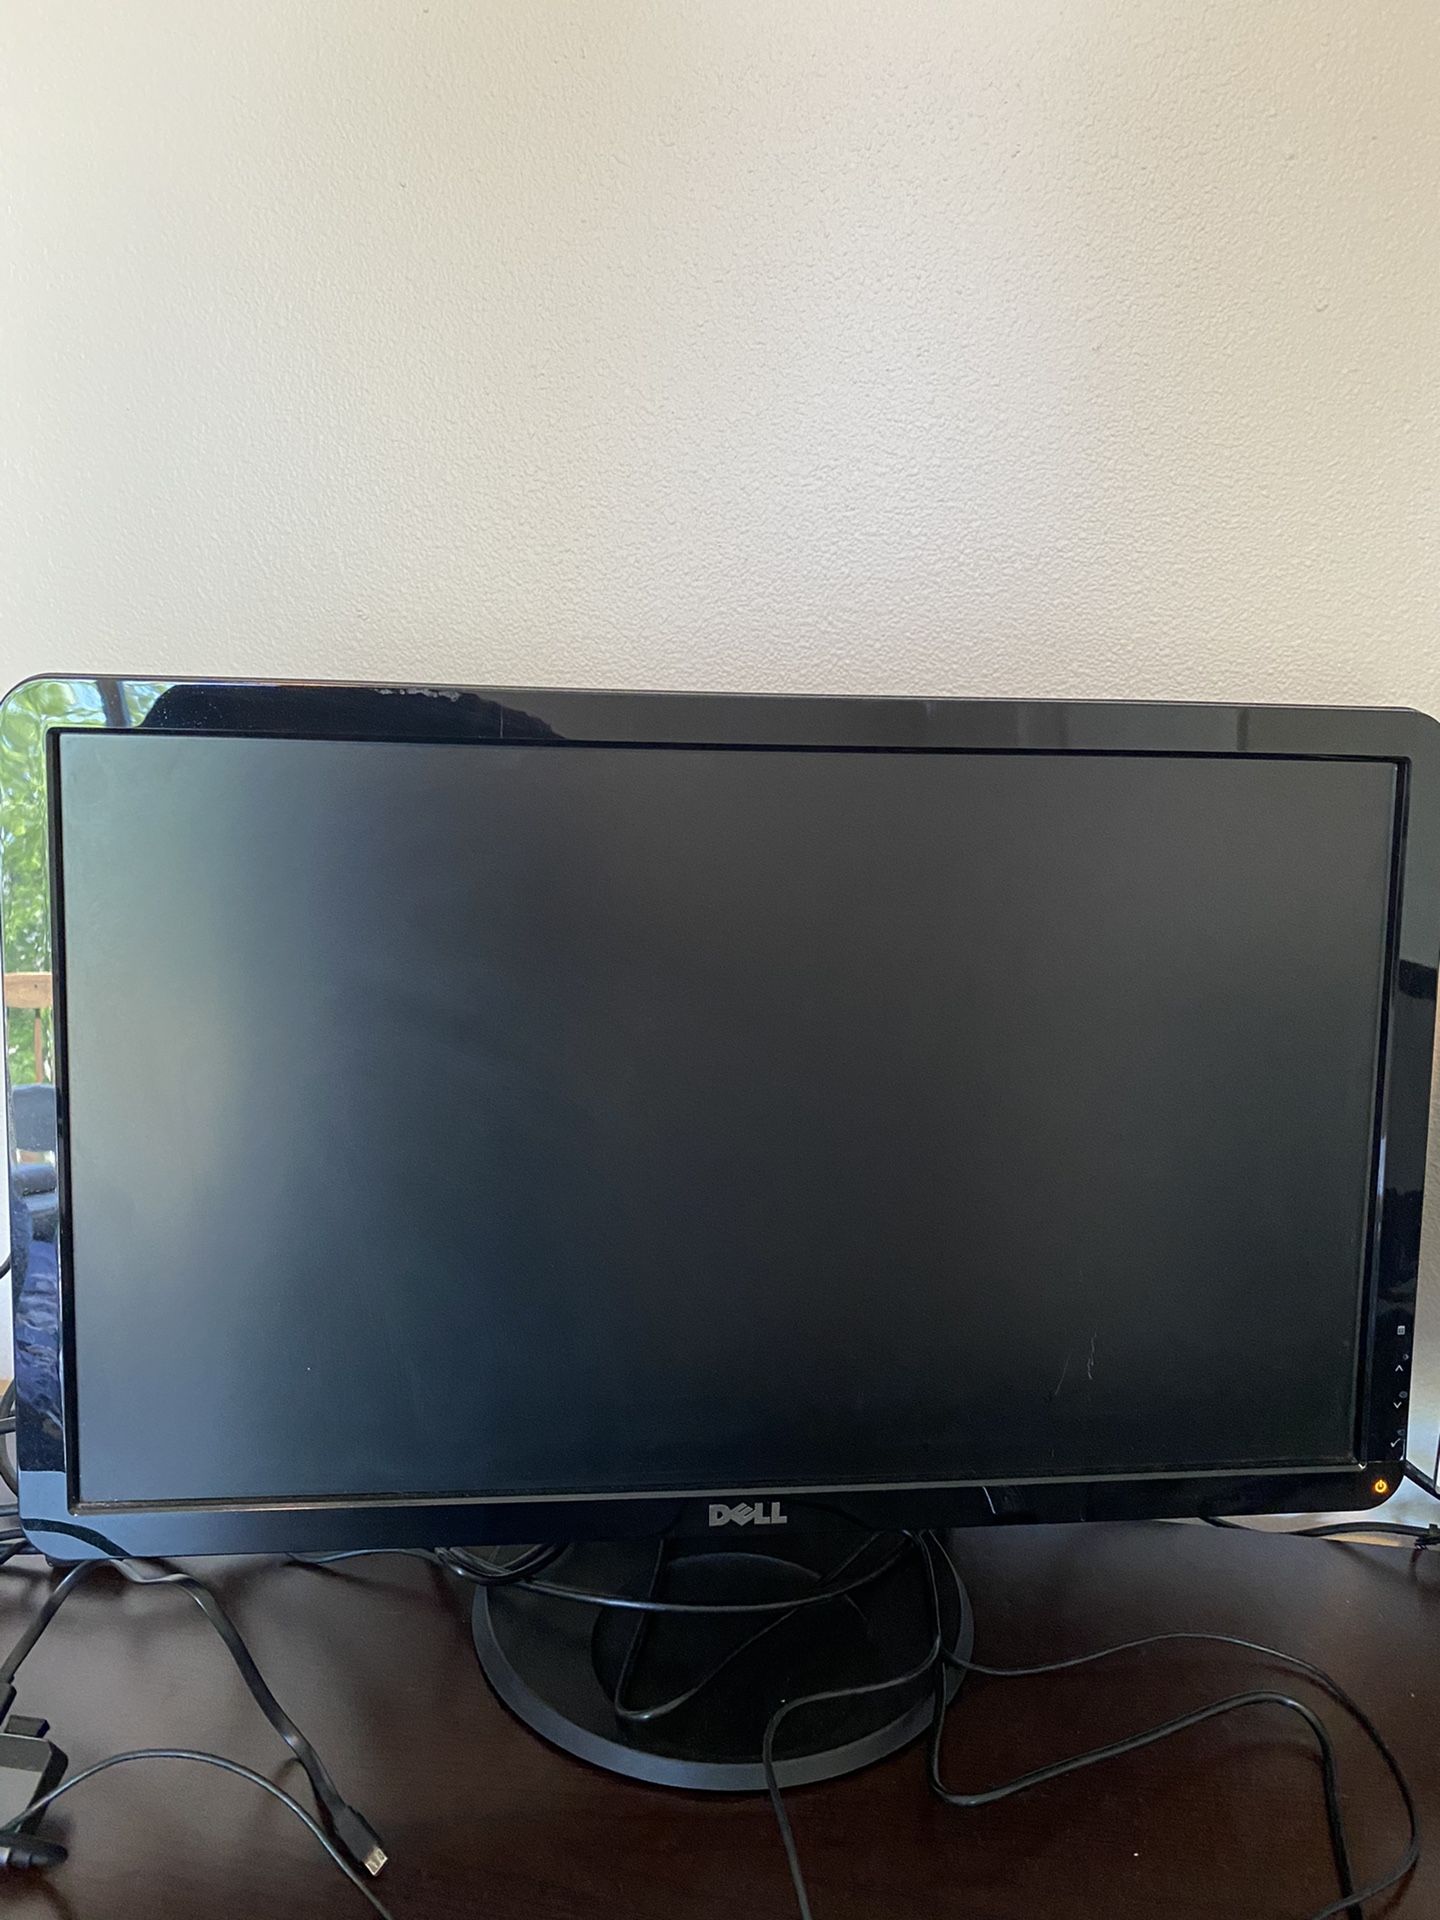 Dell 20’ monitor and keyboard